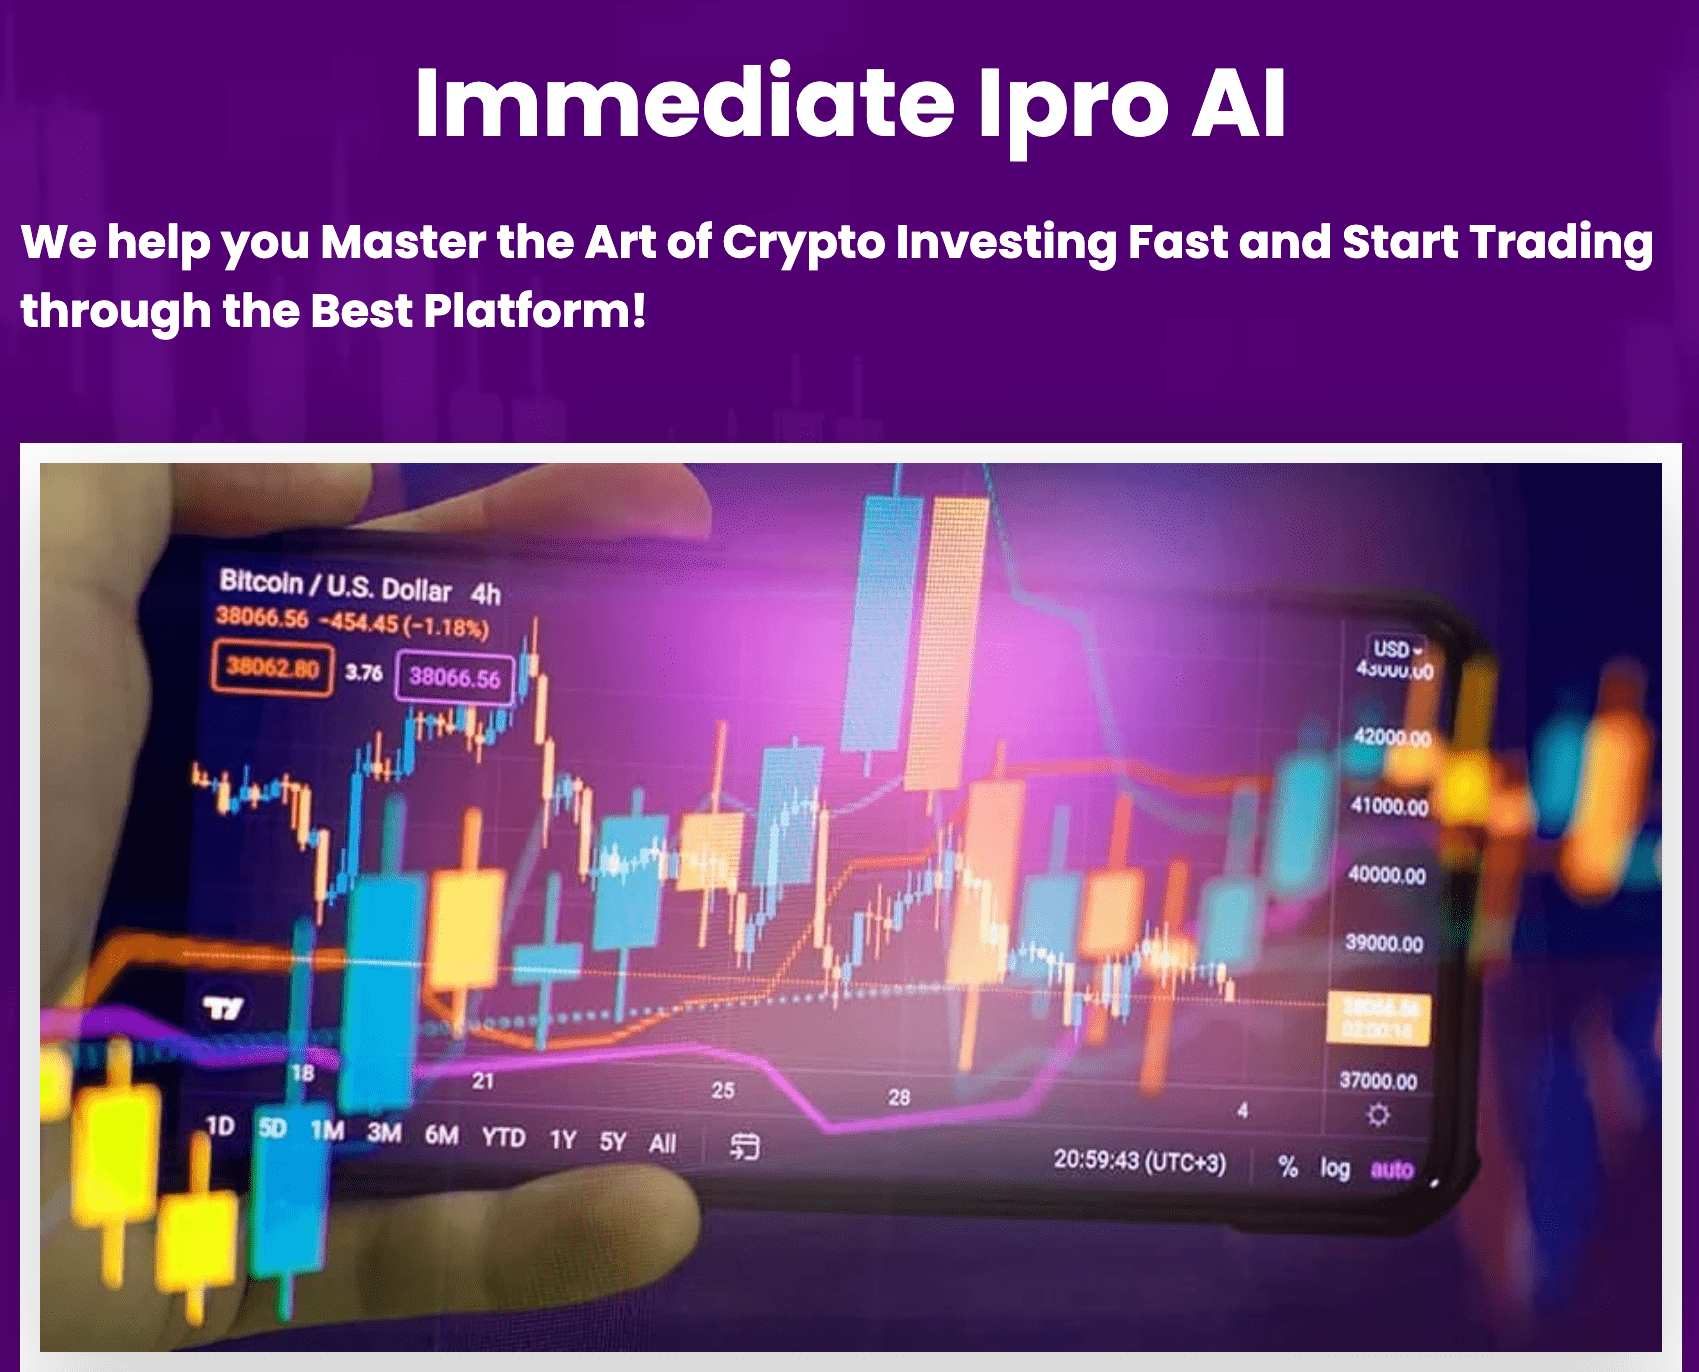 Immediate IPro AI Review